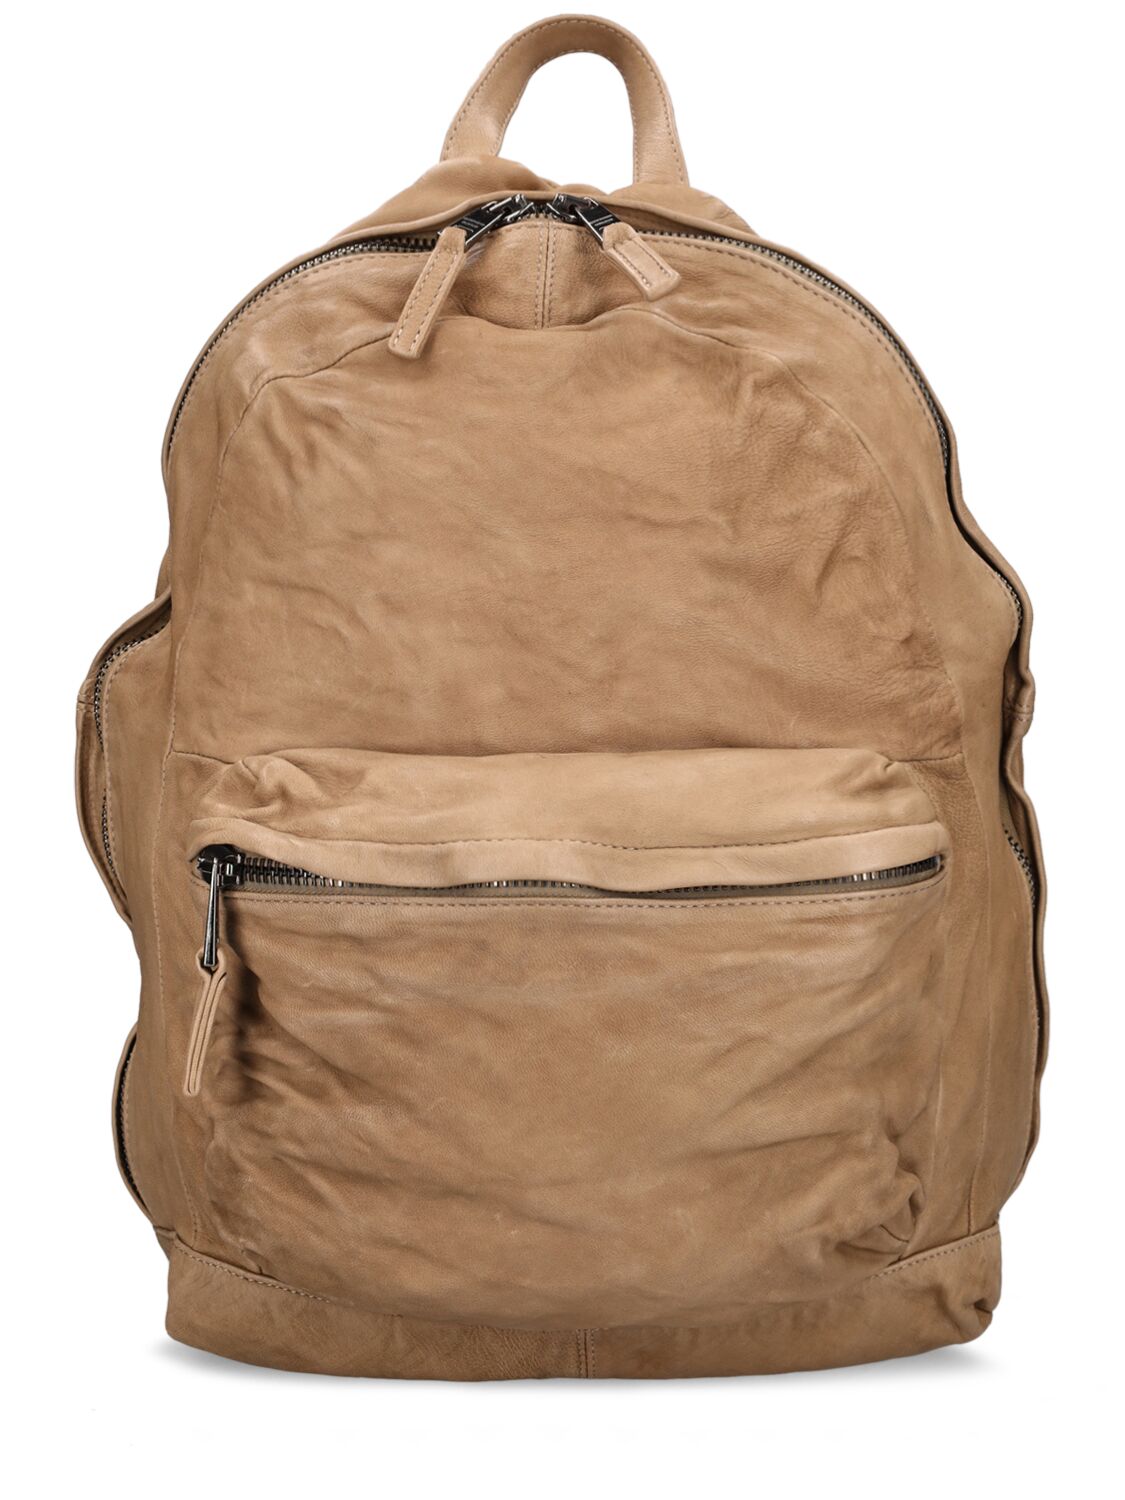 Giorgio Brato Leather Backpack In Olive Green